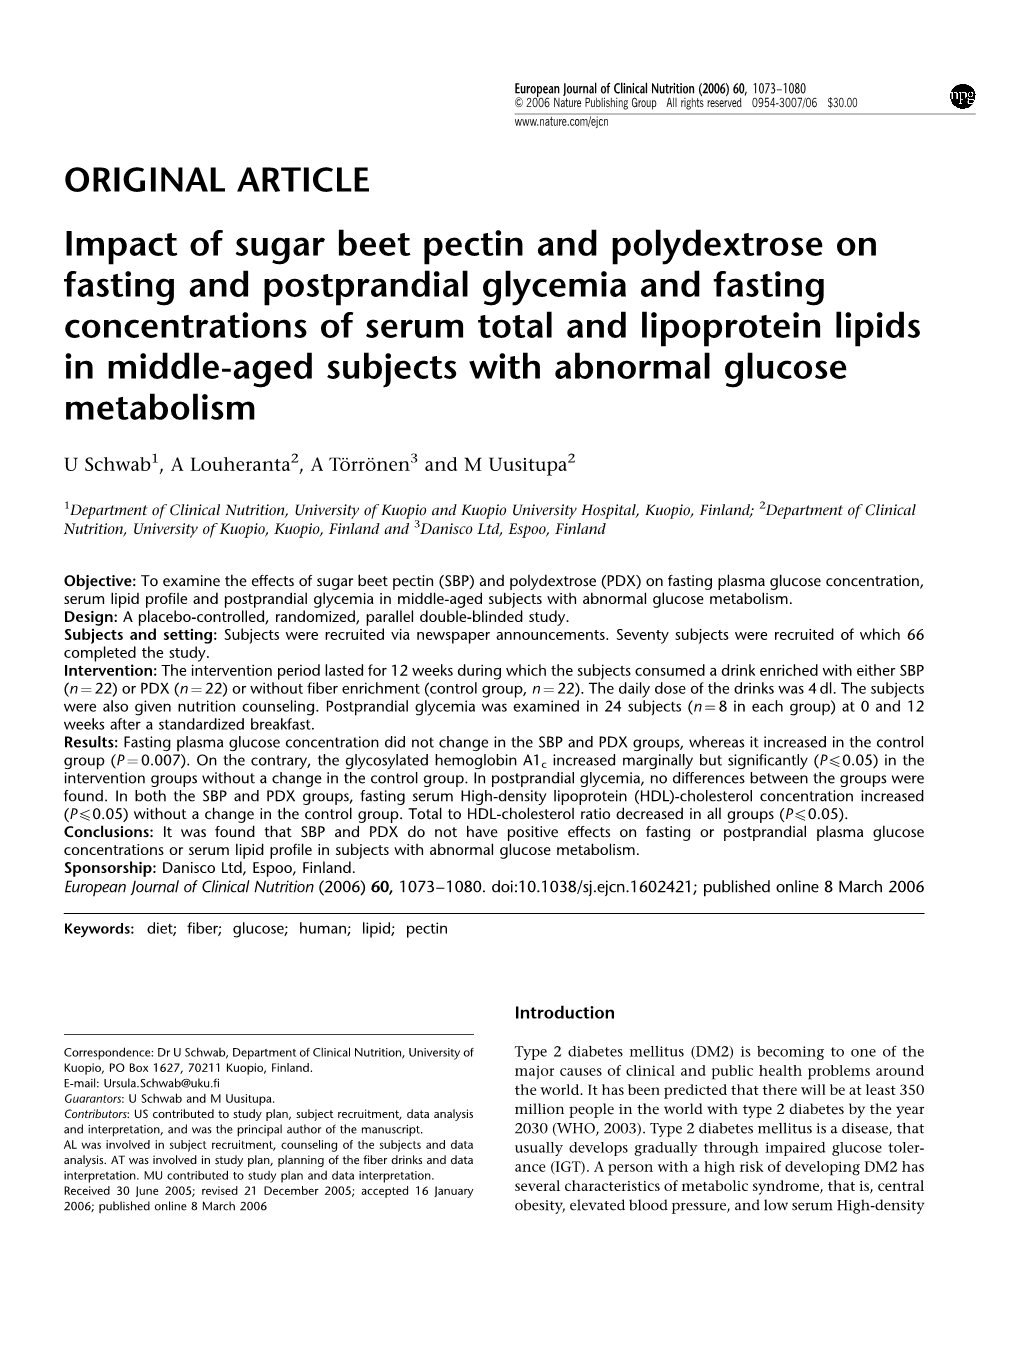 Impact of Sugar Beet Pectin and Polydextrose on Fasting And